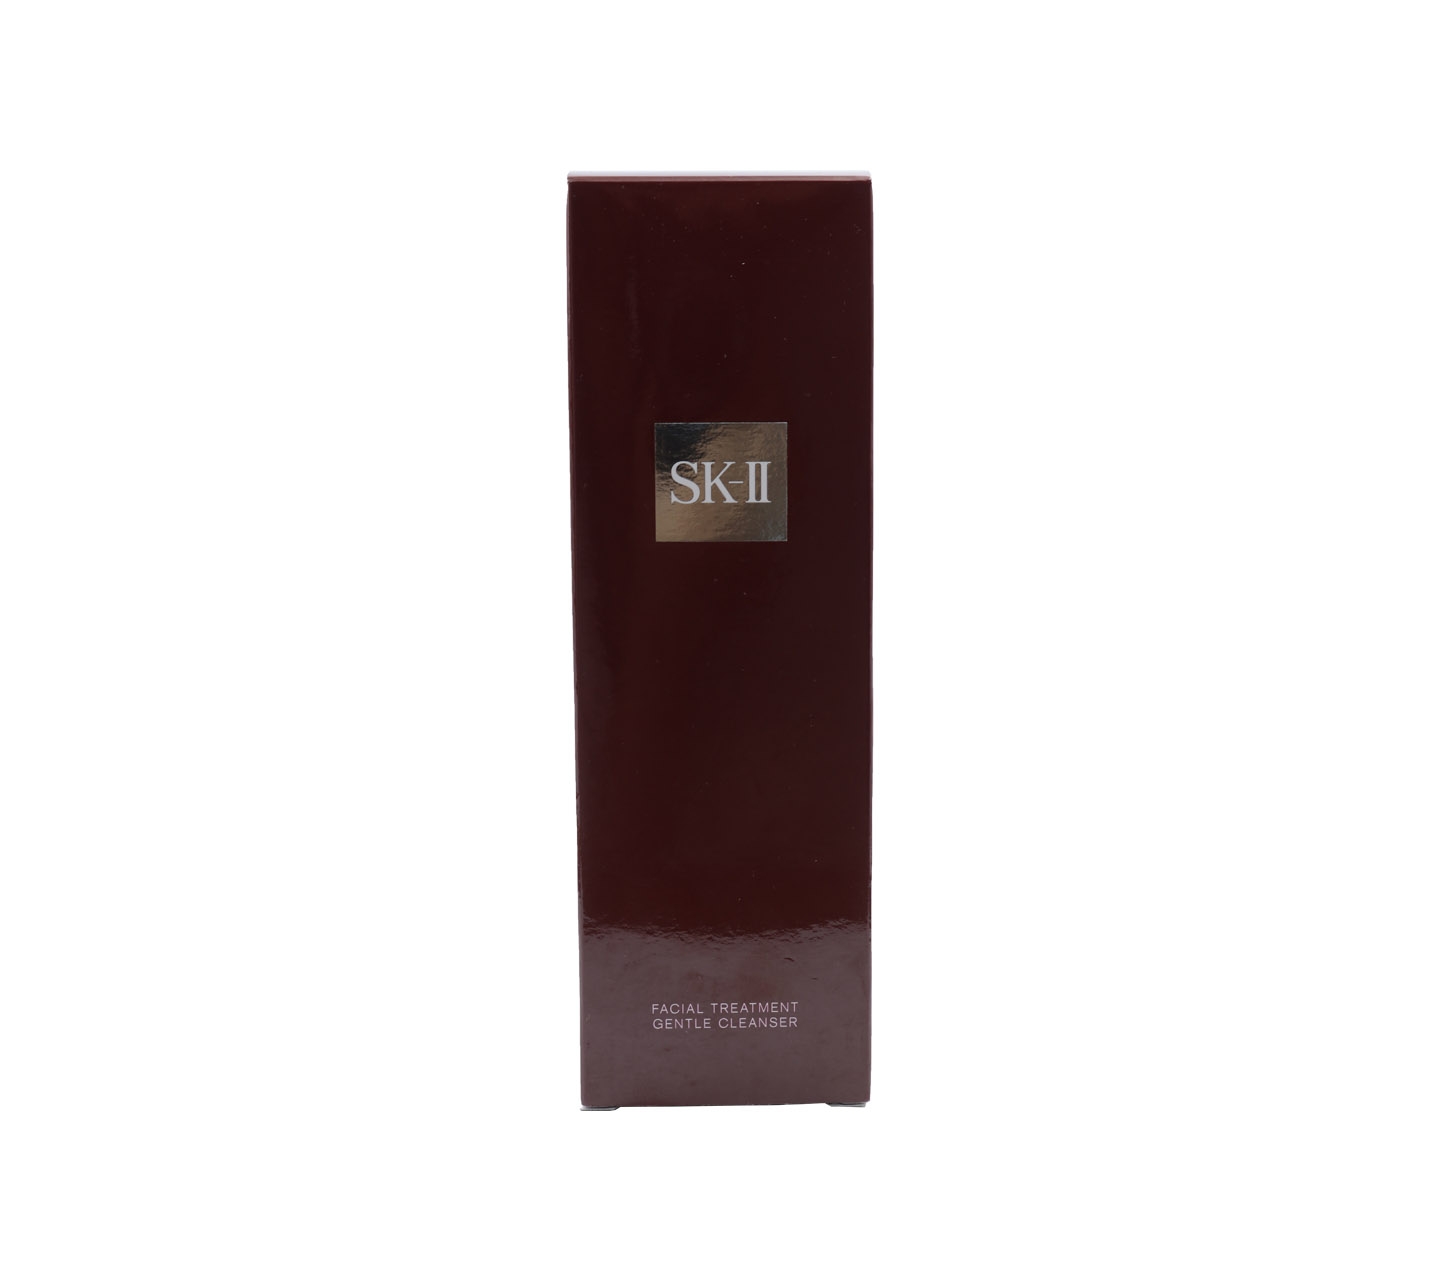 SK-II Facial Treatment Gentle Cleanser Skin Care